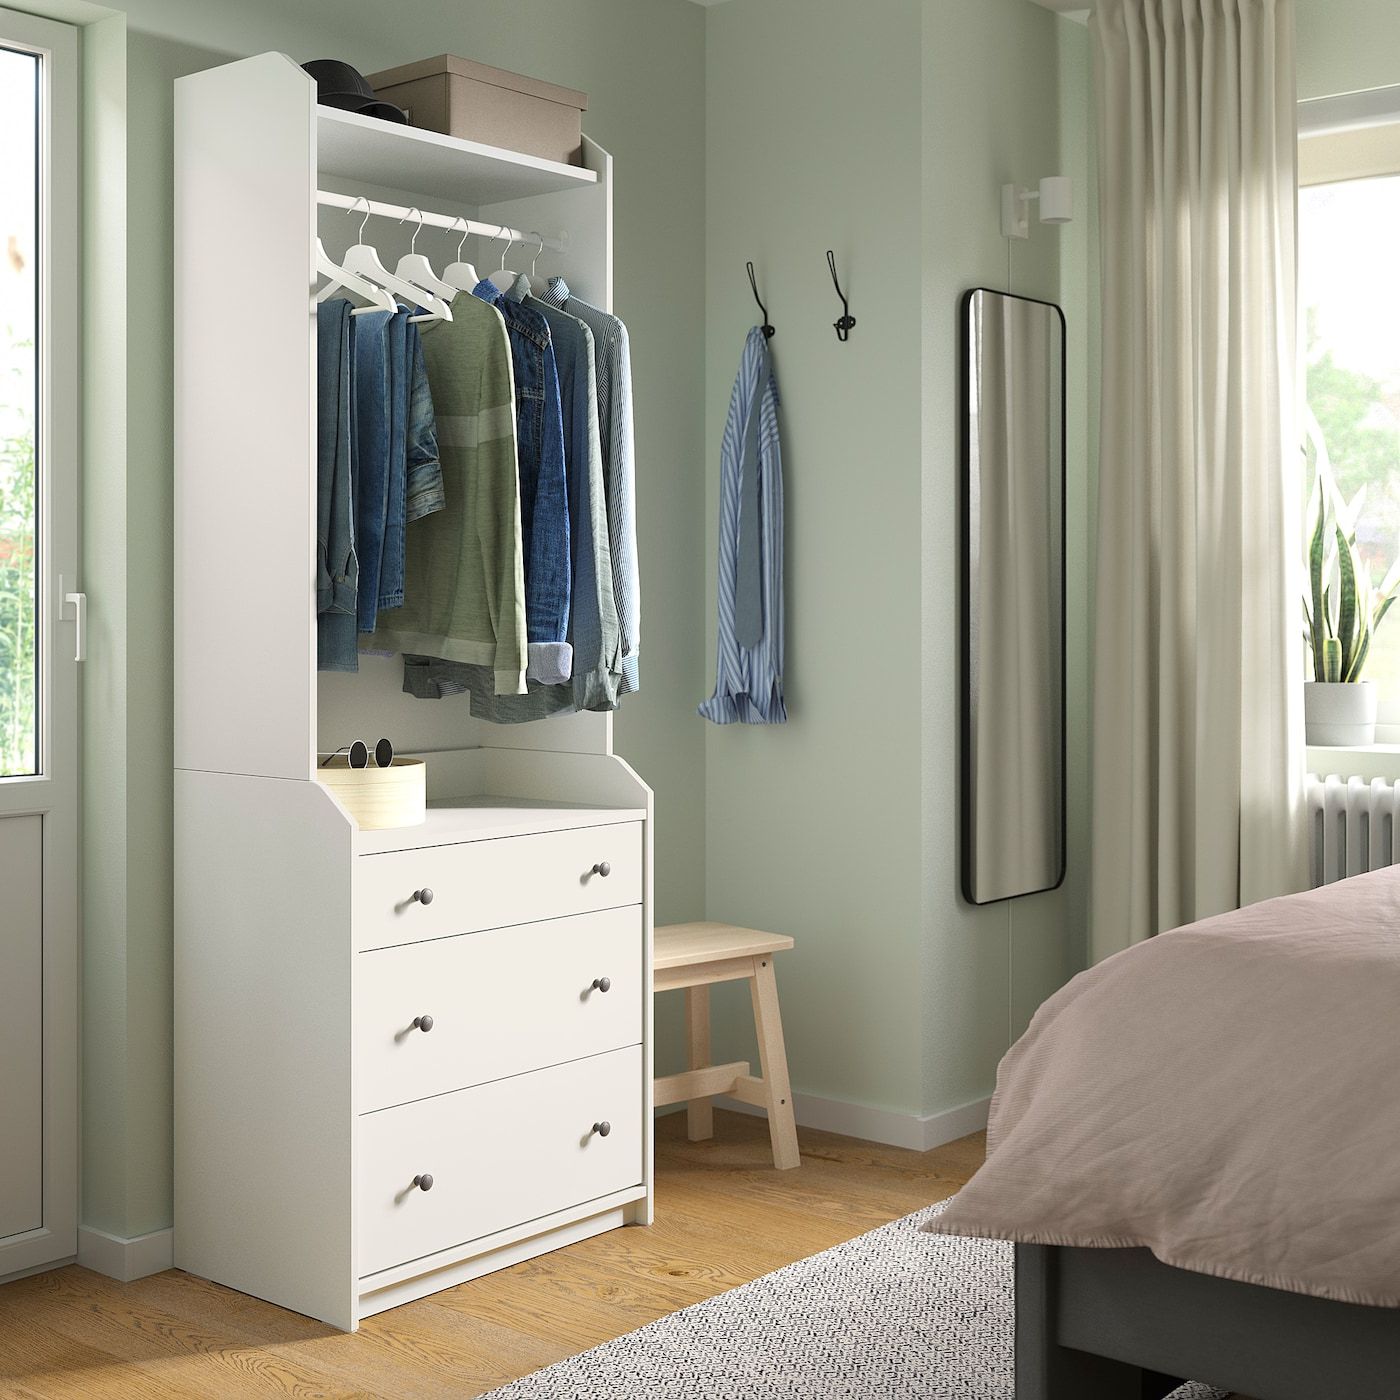 Hauga Open Wardrobe With 3 Drawers, White, 70x199 Cm – Ikea Throughout Widely Used Wardrobes With 3 Drawers (View 3 of 10)